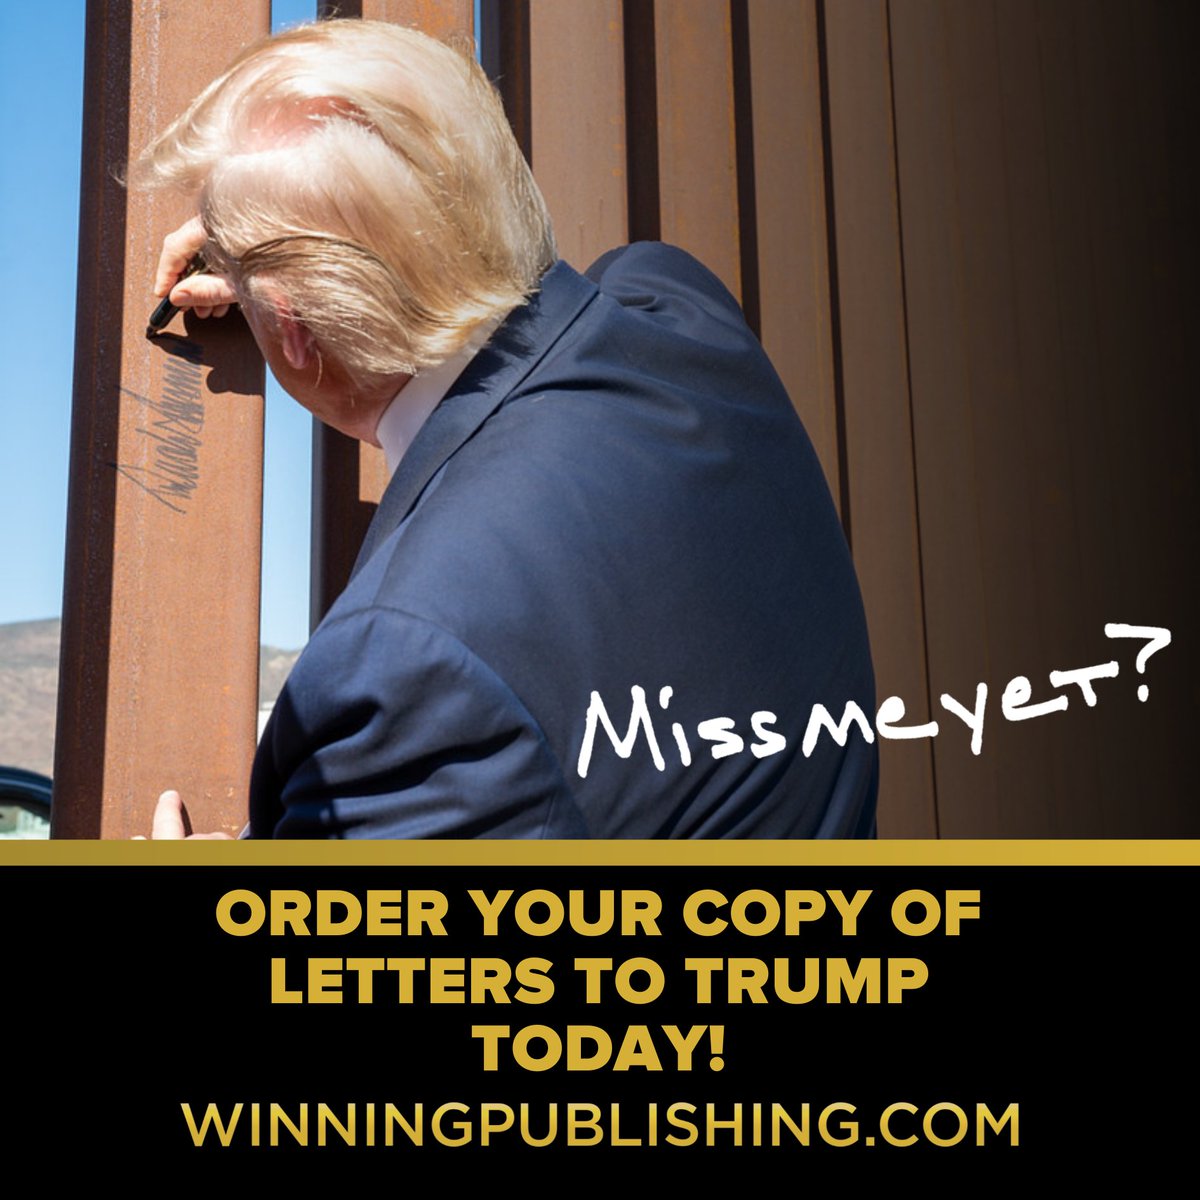 Get your copy of LETTERS TO TRUMP today at WINNINGPUBLISHING.com!